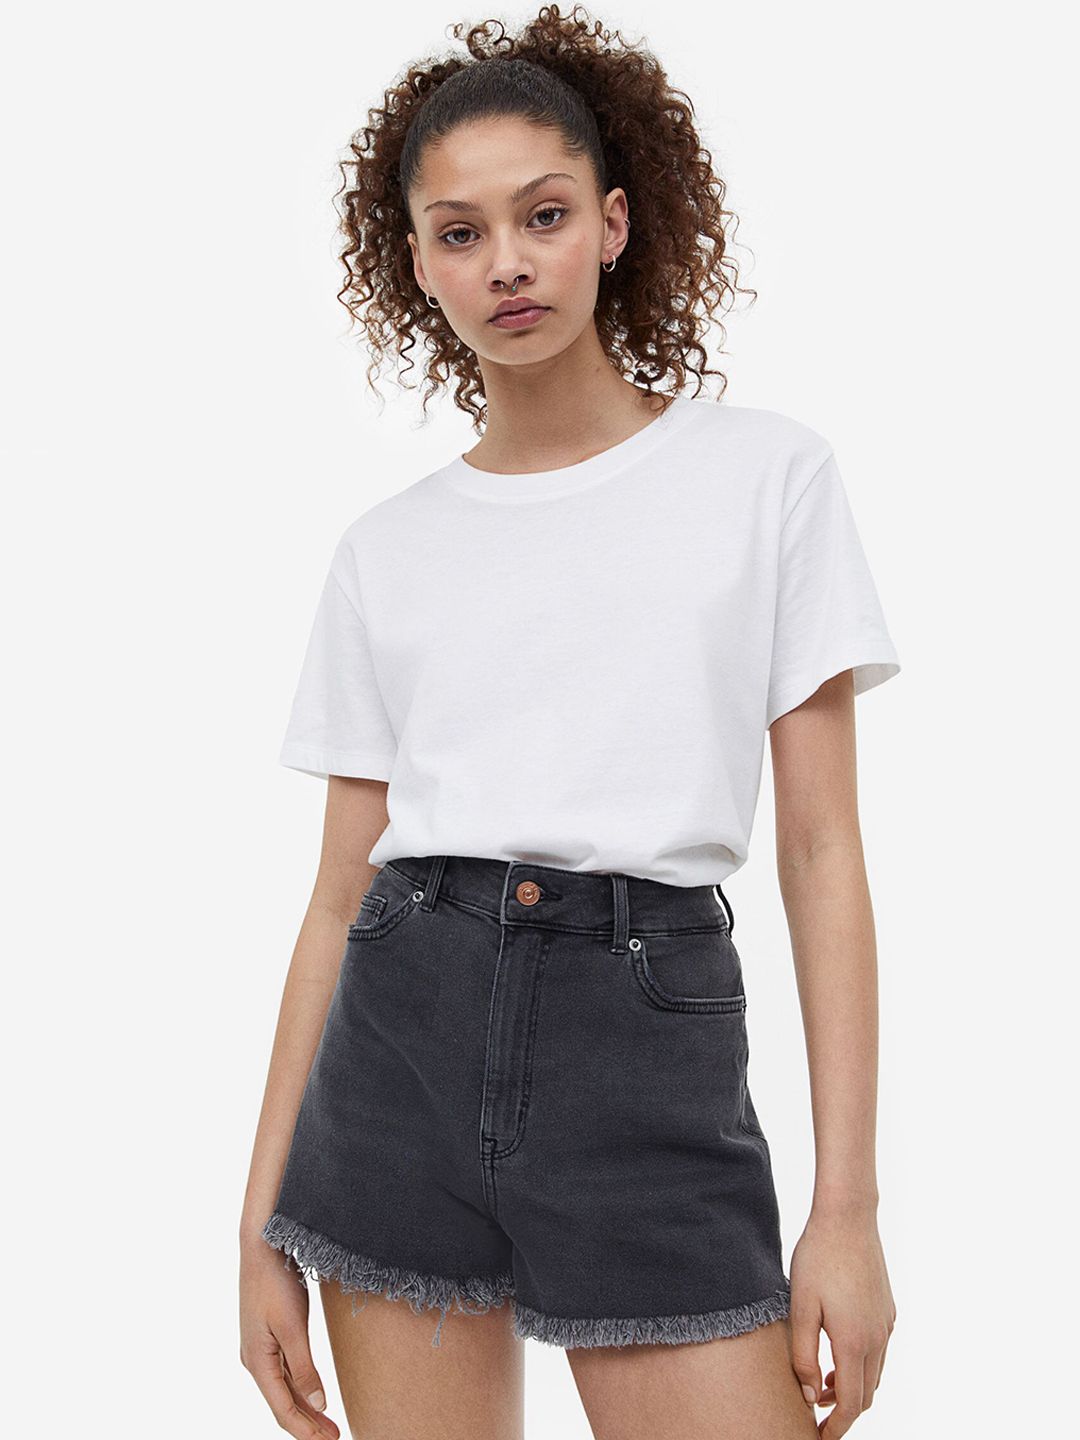 H&M Women High-Waisted Denim Shorts Price in India